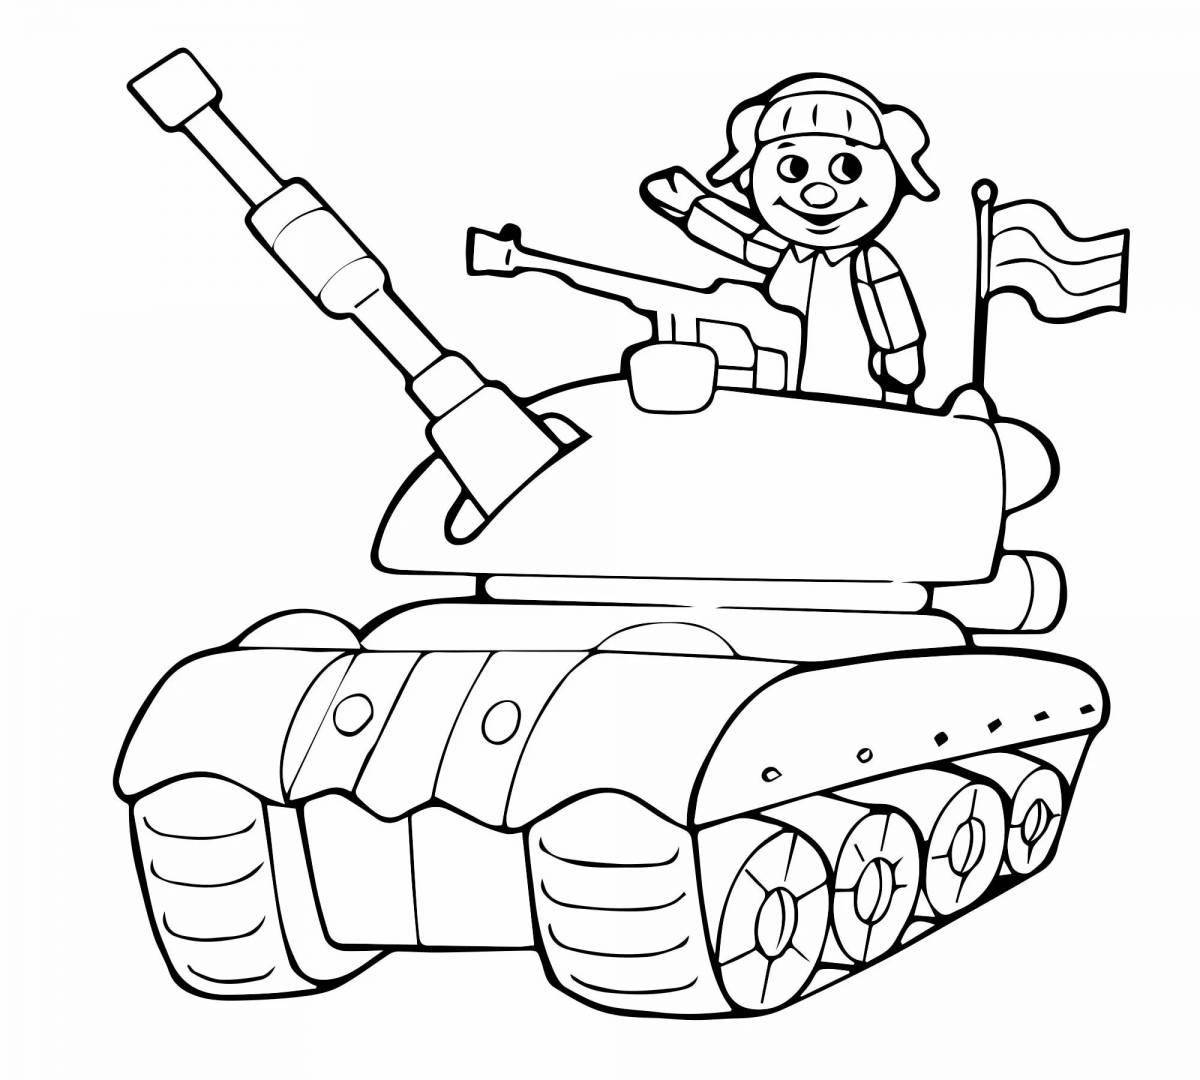 Gorgeous soldier and tank coloring book for kids